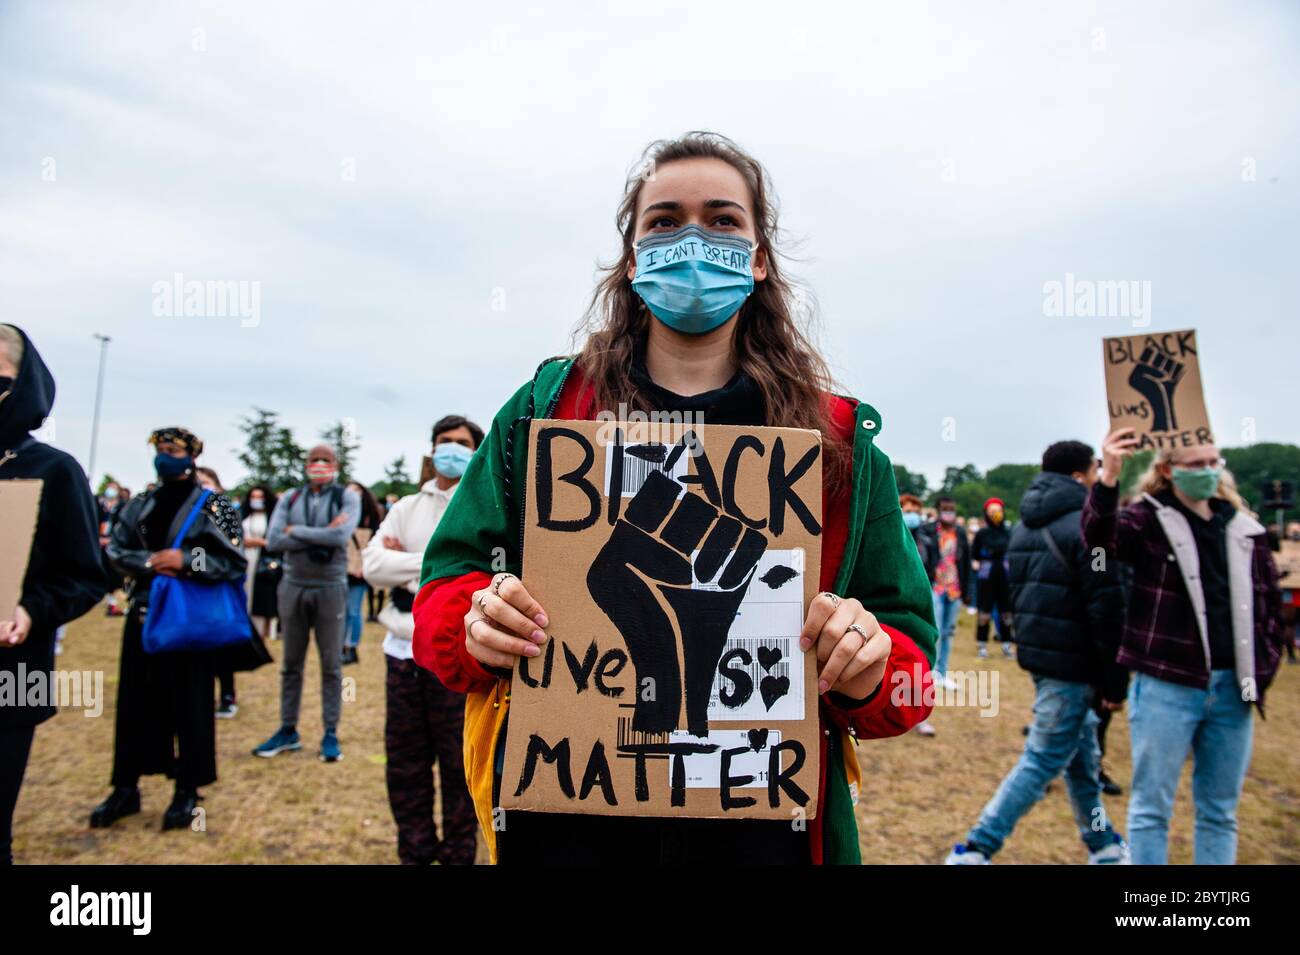 A protester holding a BLM placard during the demonstration.Thousands of people gathered at the Nelson Mandela Park to protest against police brutality and racism which is an initiative of residents of the Bijlmer district, the largest population of Afro-Dutch people in Amsterdam. The black community has been a victim of oppression for decades since the 1990s. Stock Photo